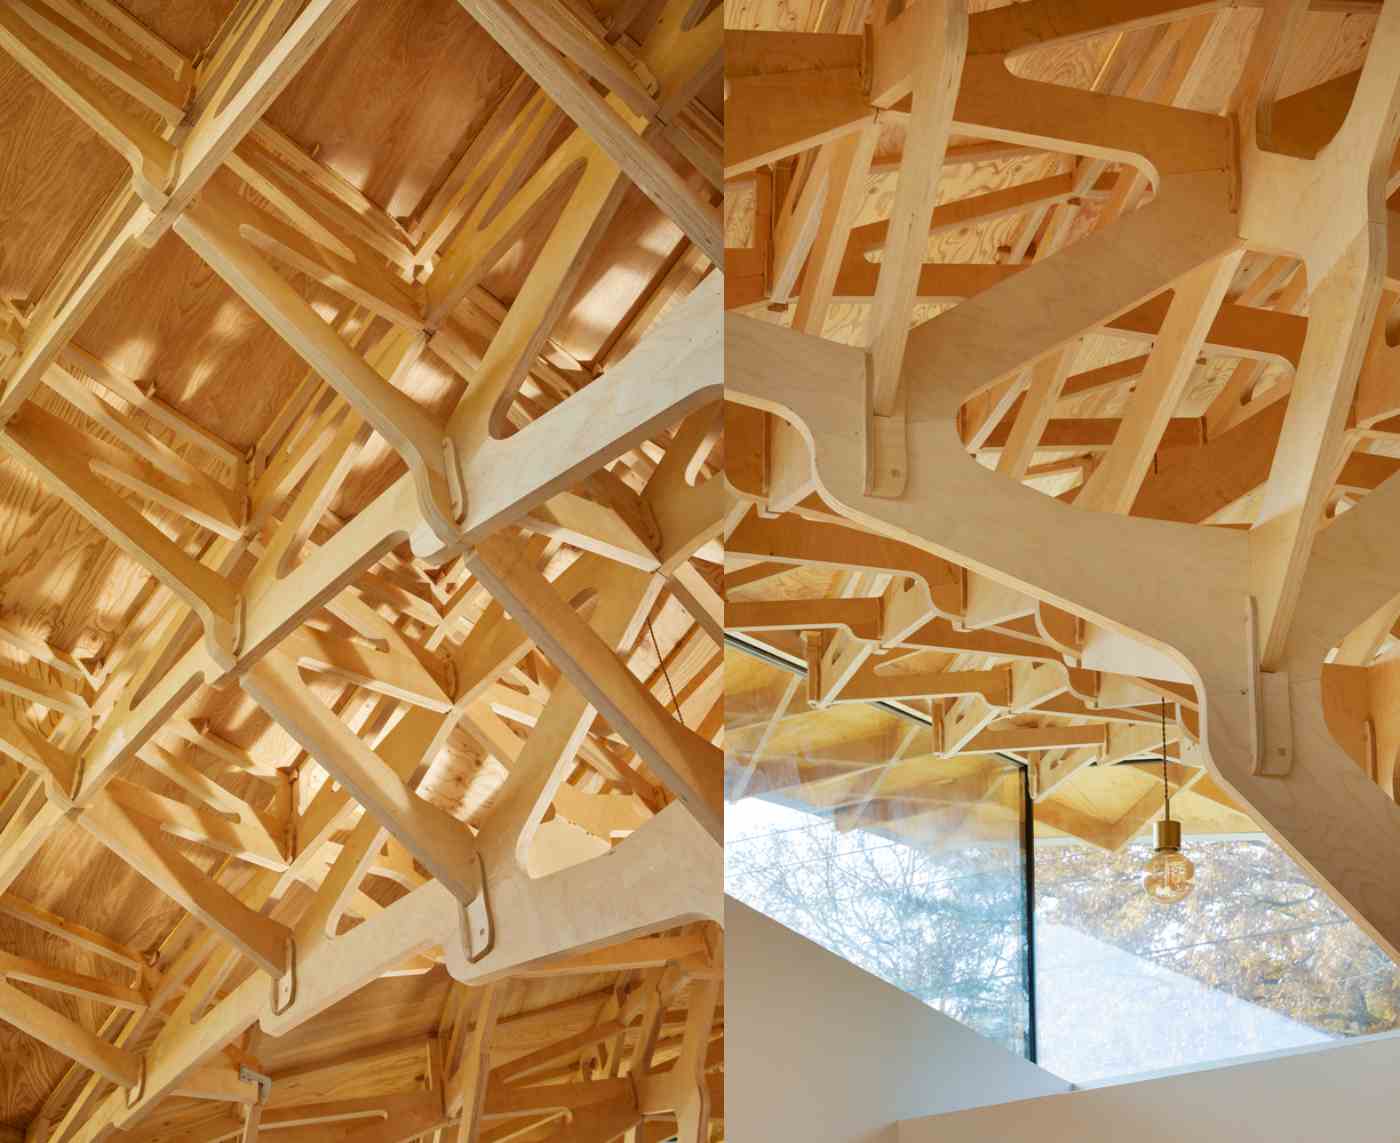 suspended timber roof skylights glass interior architecture